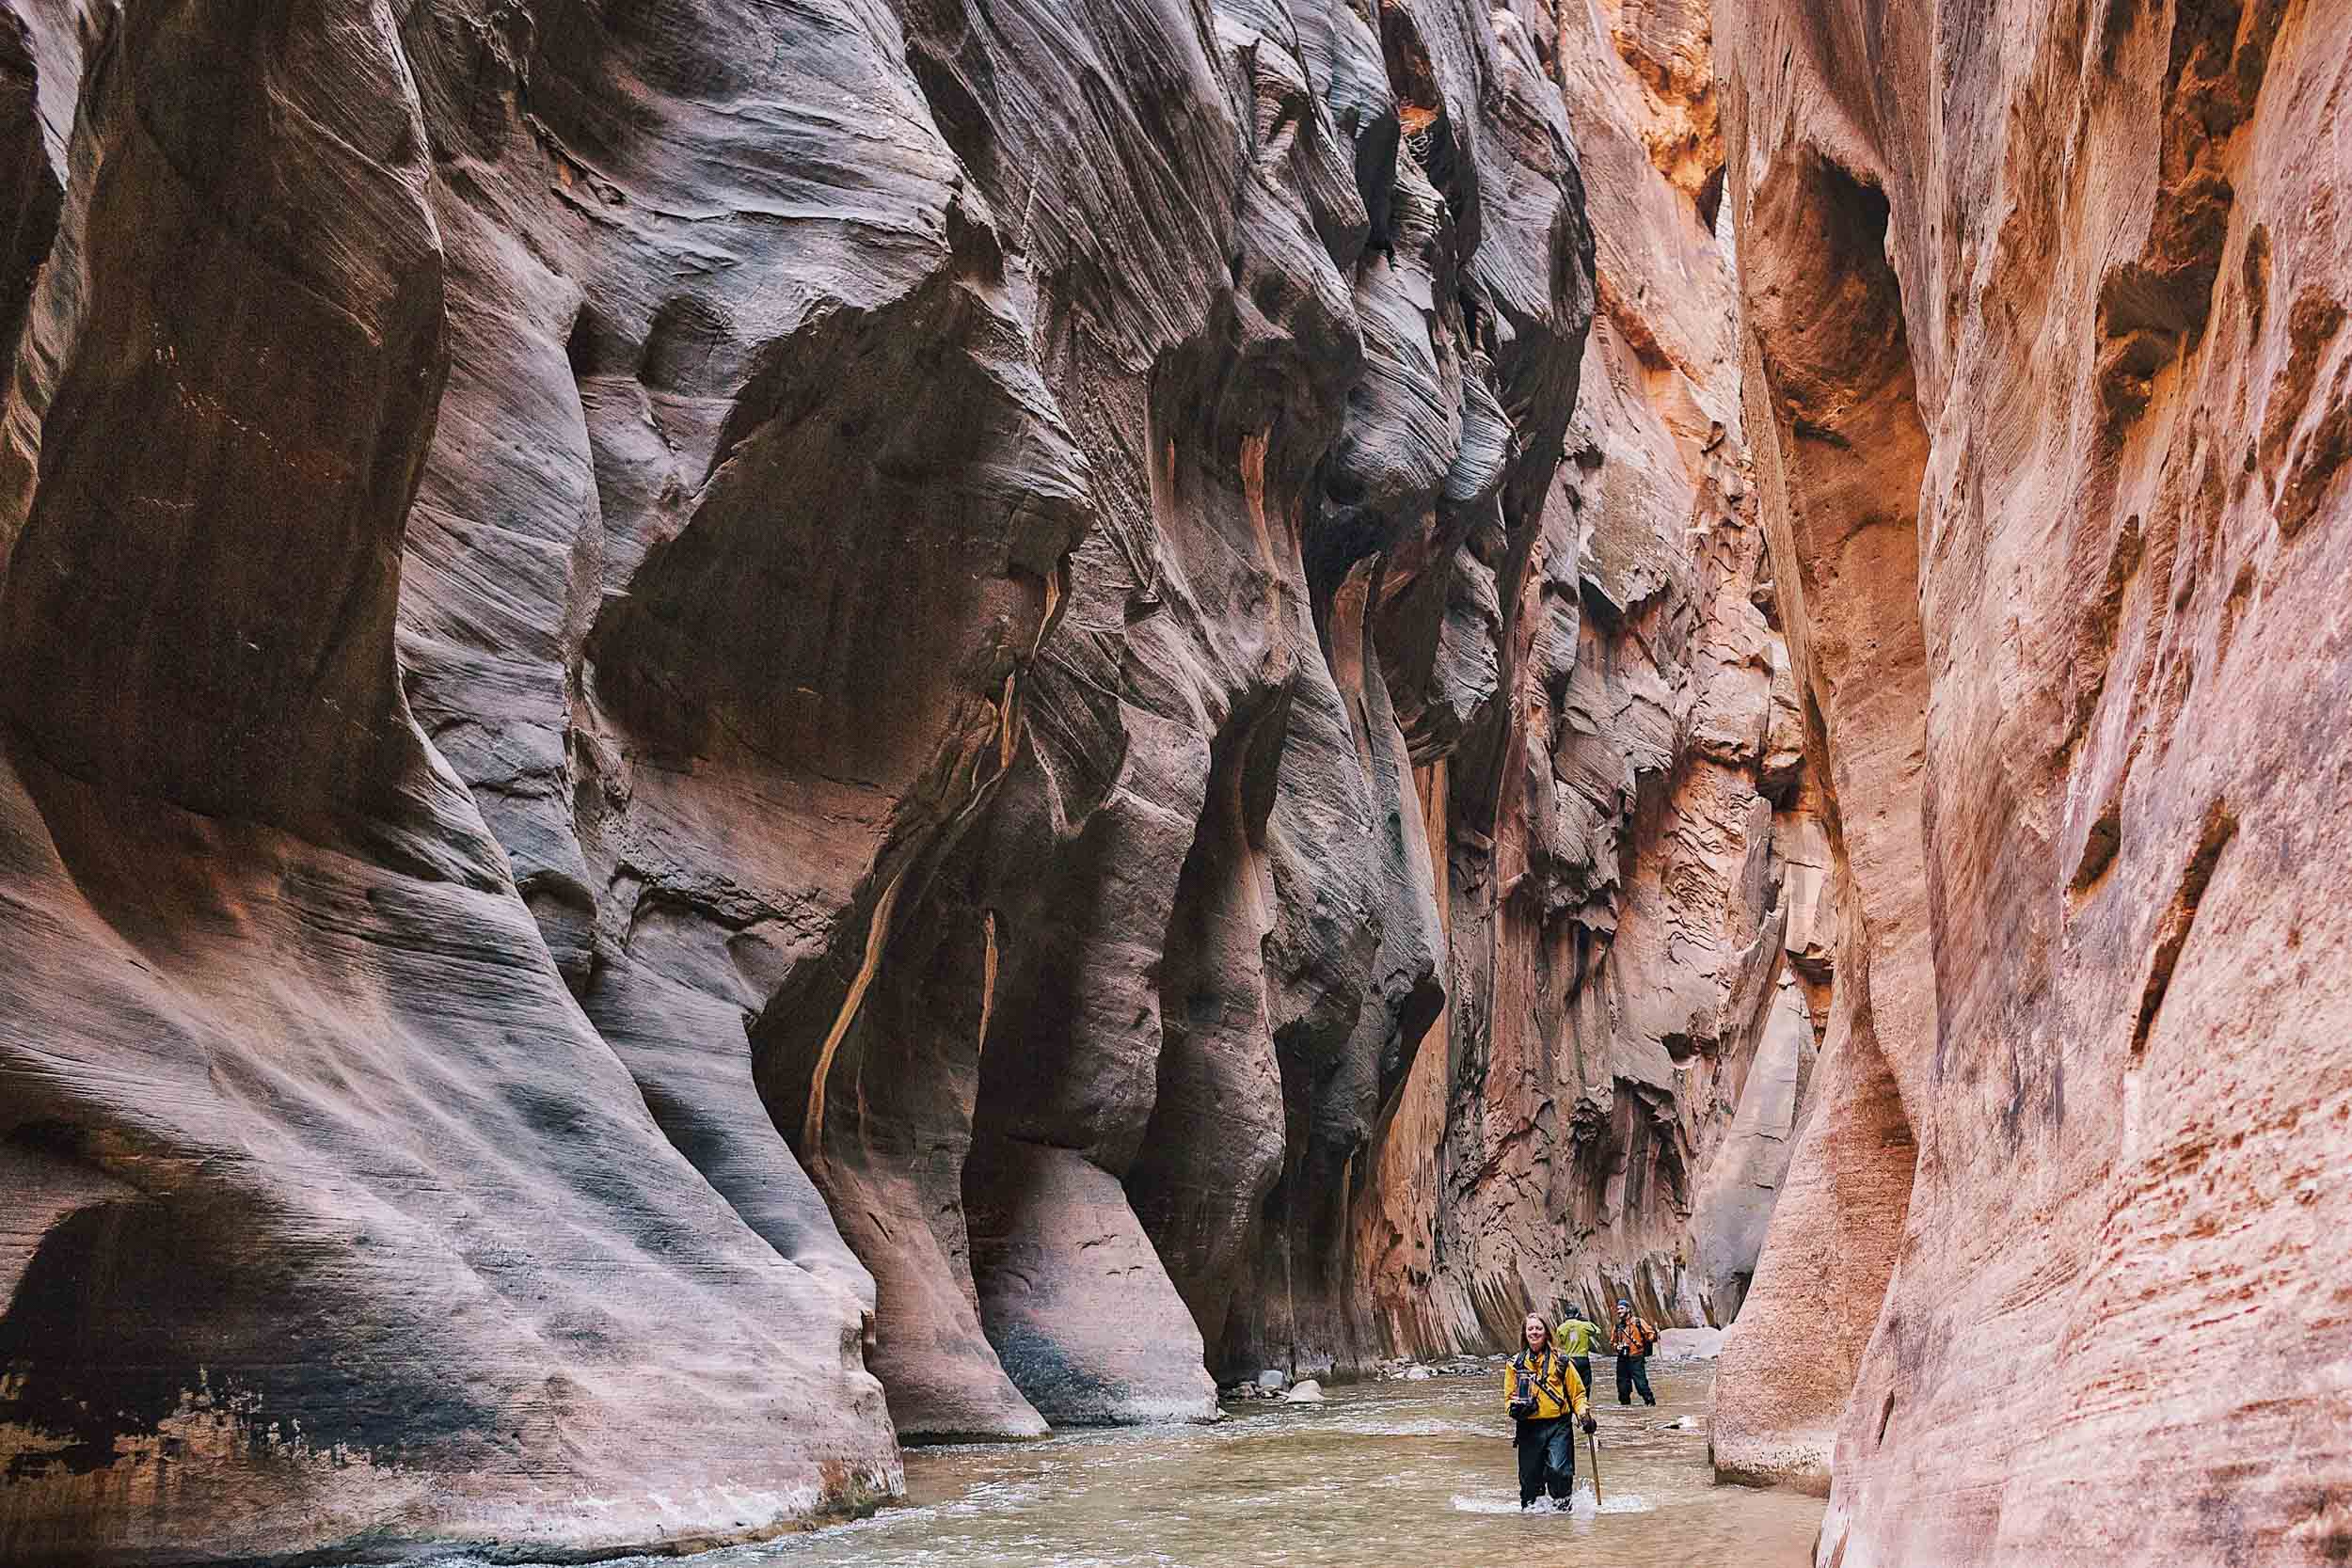 Hiking the Narrows at Zion National Park during winter.  A must!